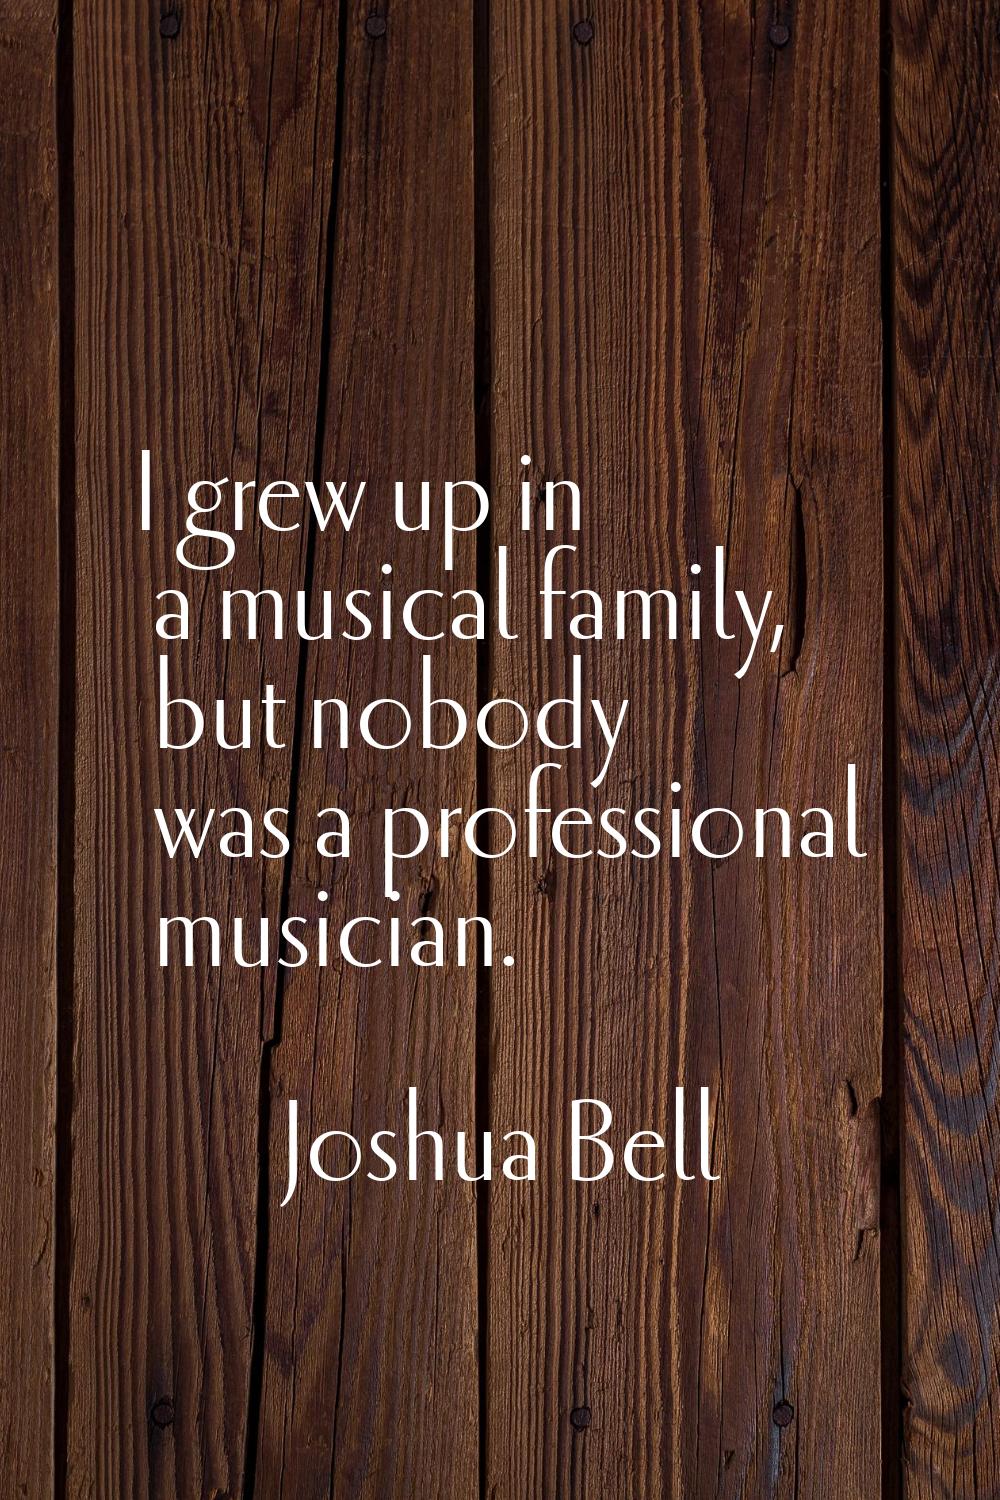 I grew up in a musical family, but nobody was a professional musician.